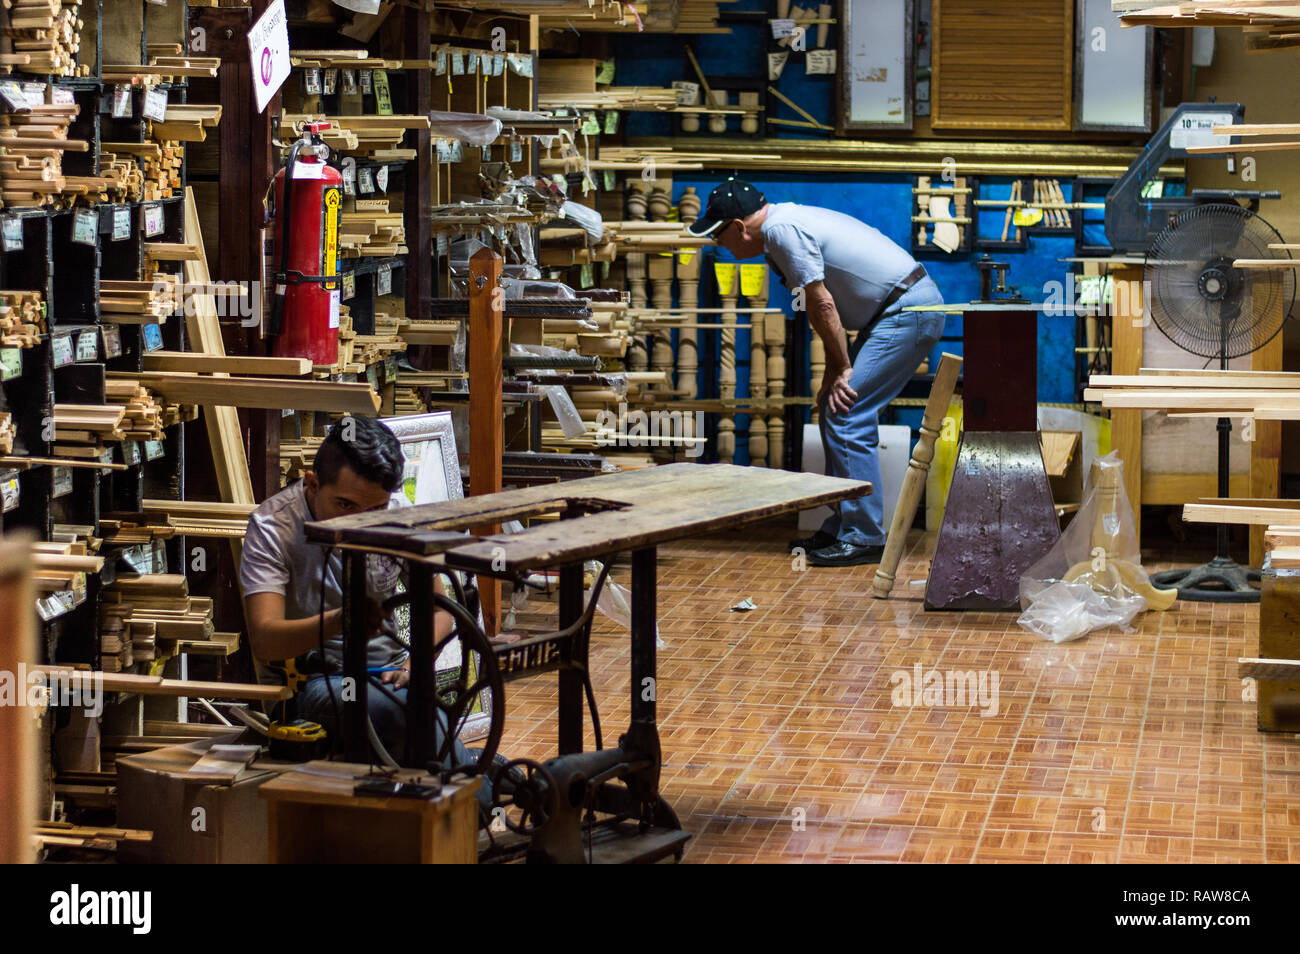 Clients at Wood shop in Yucatan, Mexico Stock Photo